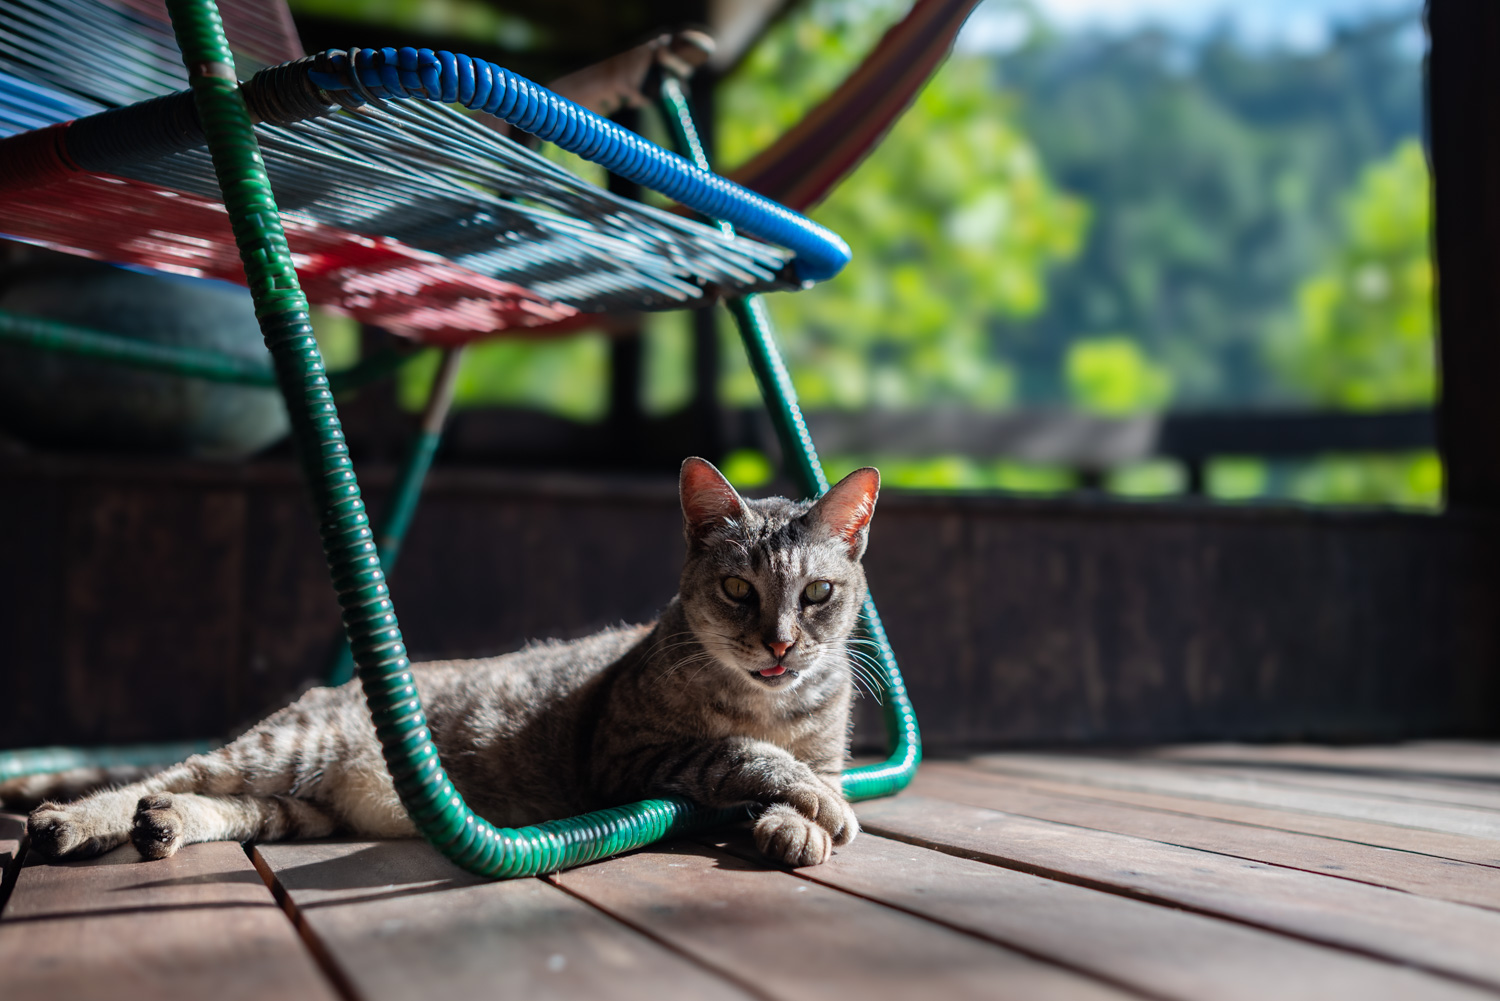 Spyder Hill's resident cat, Cheeto - relaxing underneath a chair.